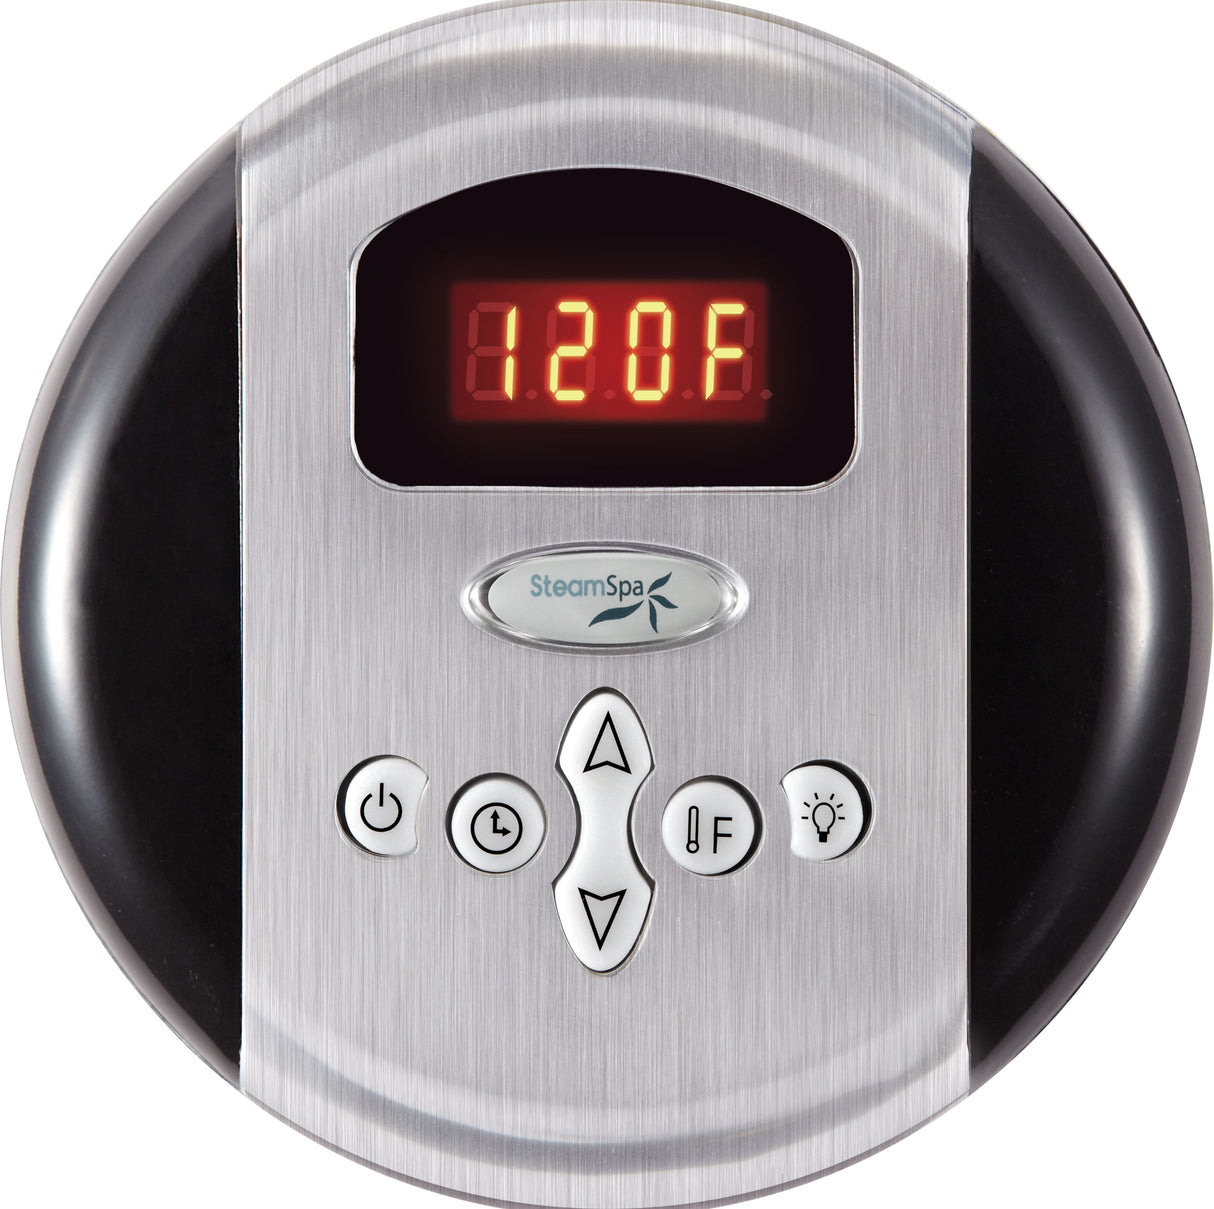 SteamSpa Programmable Control Panel with Presets in Brushed Nickel G-SC-200-BN